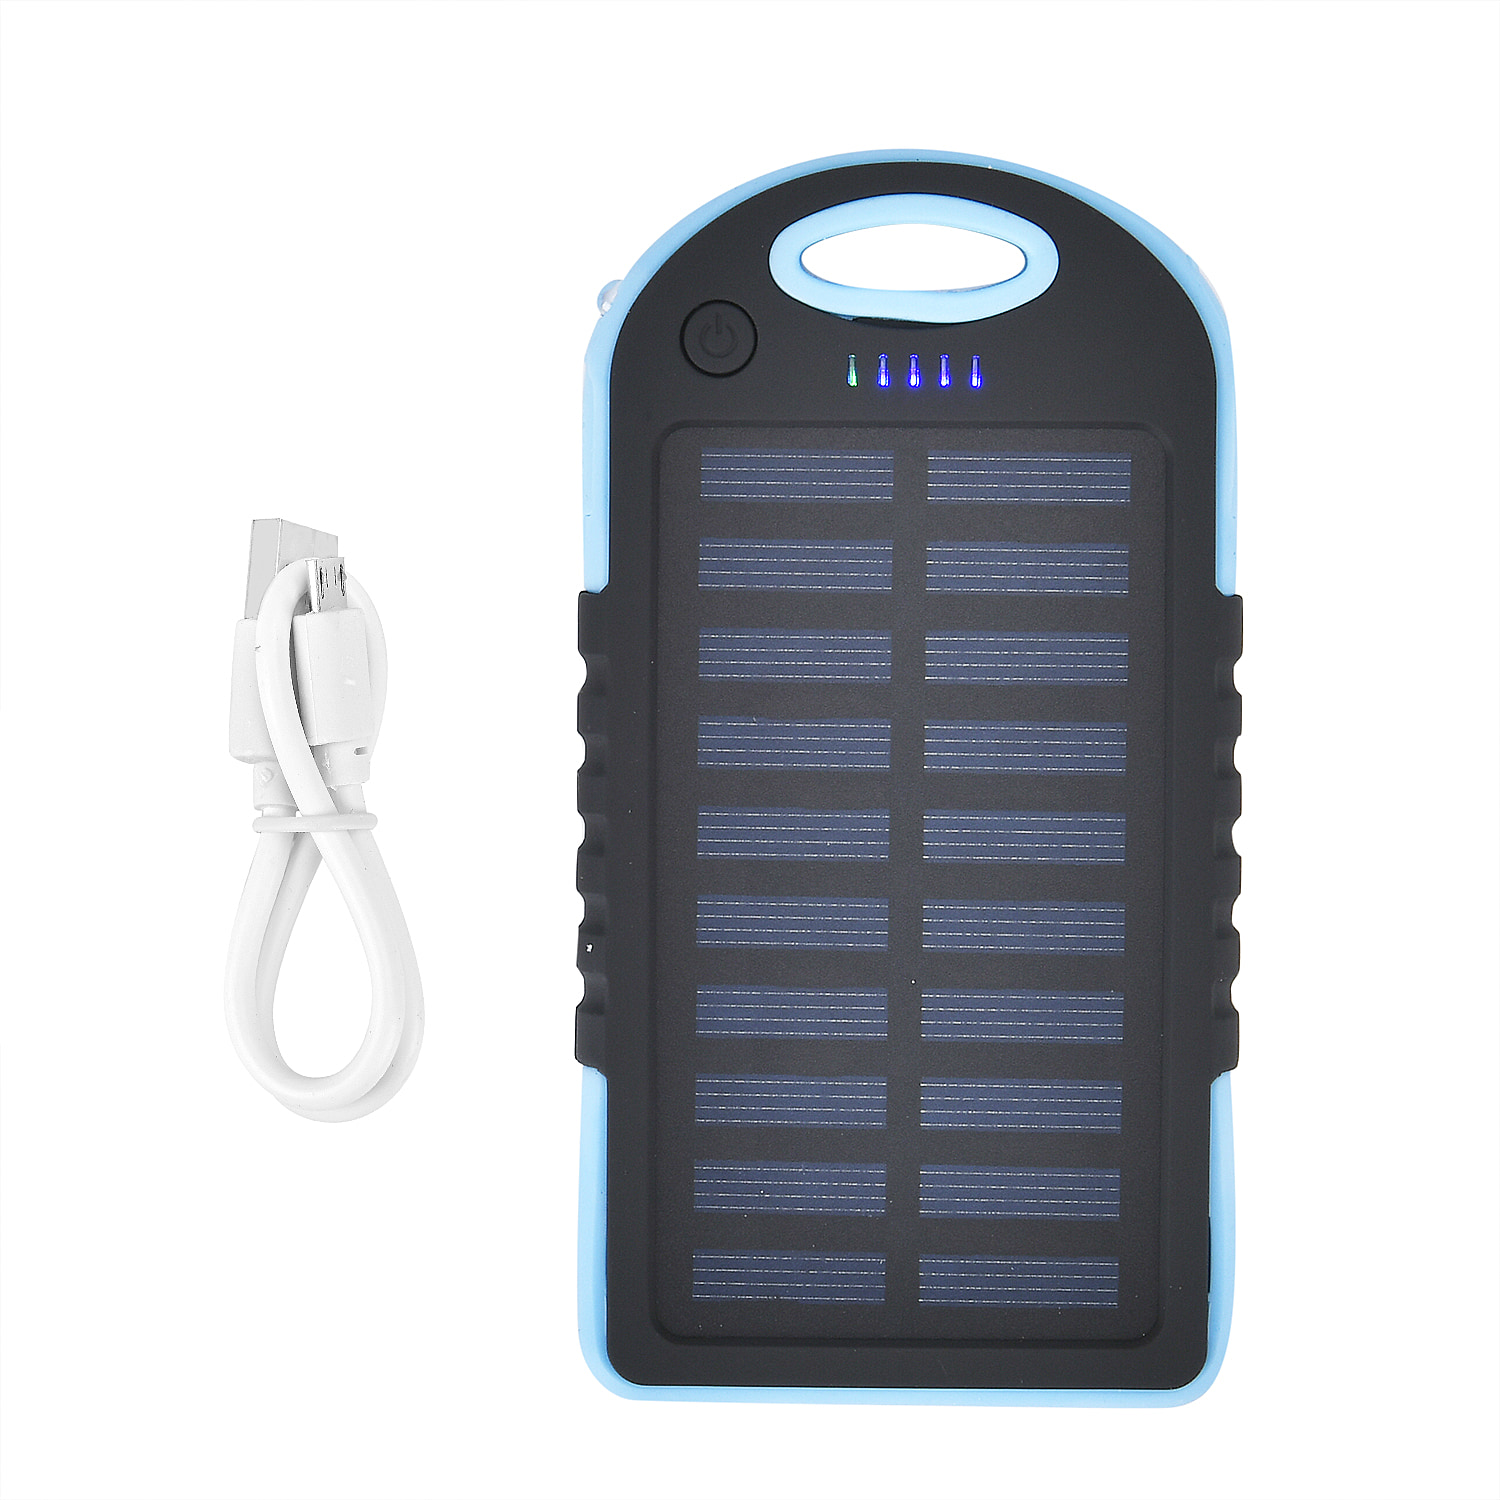 Energy Efficient Solar Charger 5000 mAH Power Bank with charging Cable included- Blue & Black